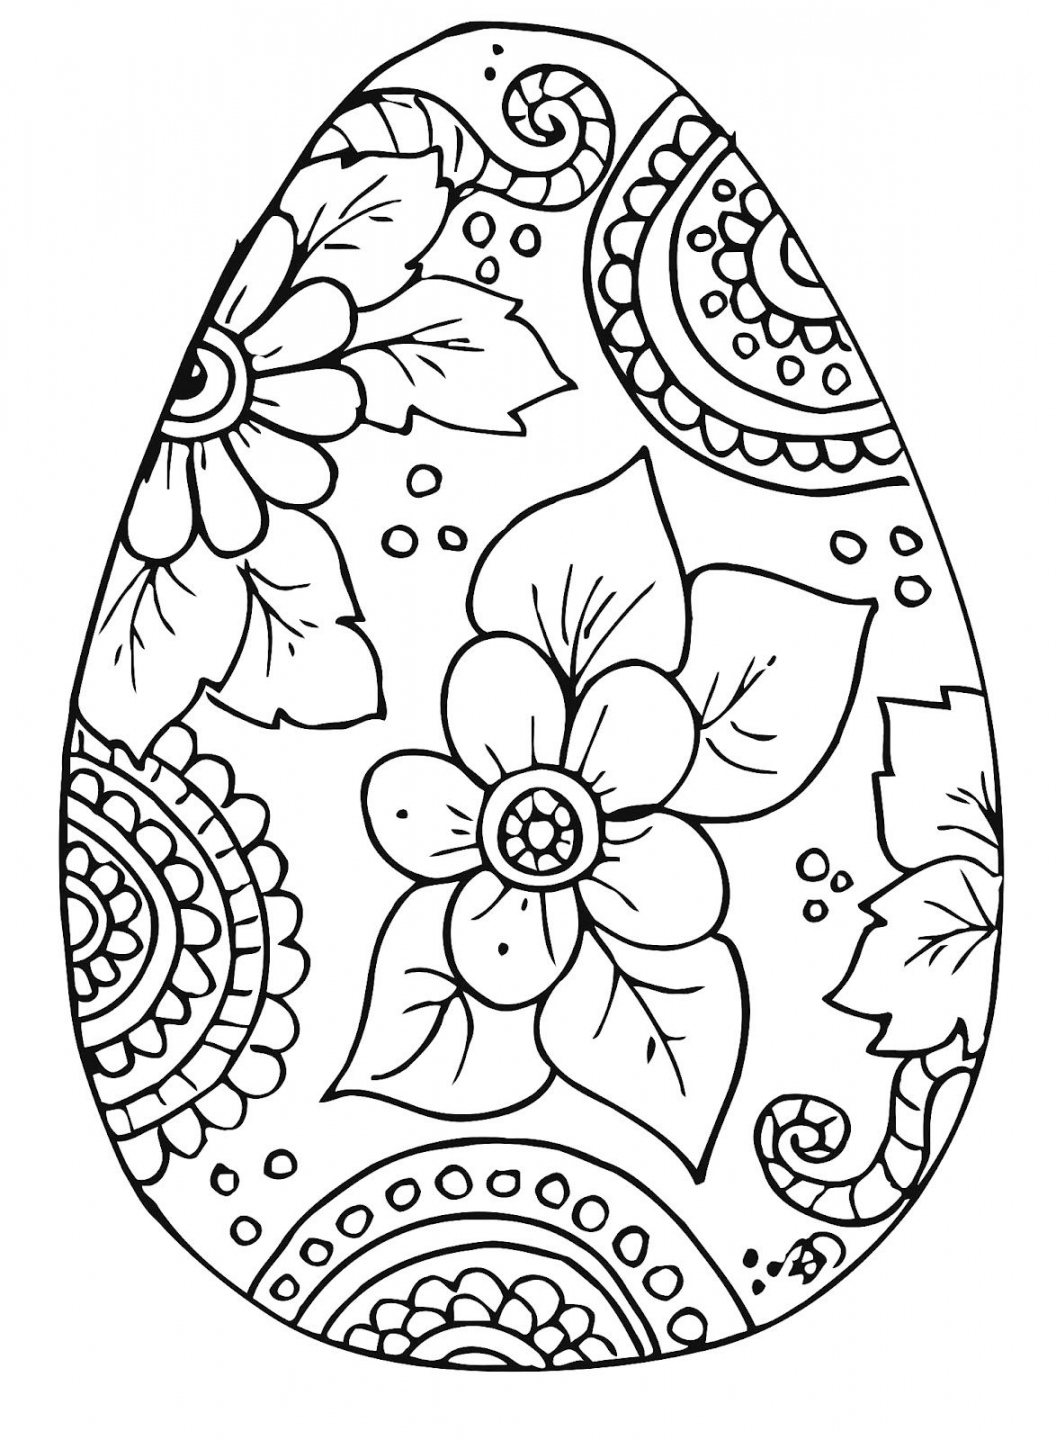 Free Printable Coloring Pages For Easter - Printable - B.D